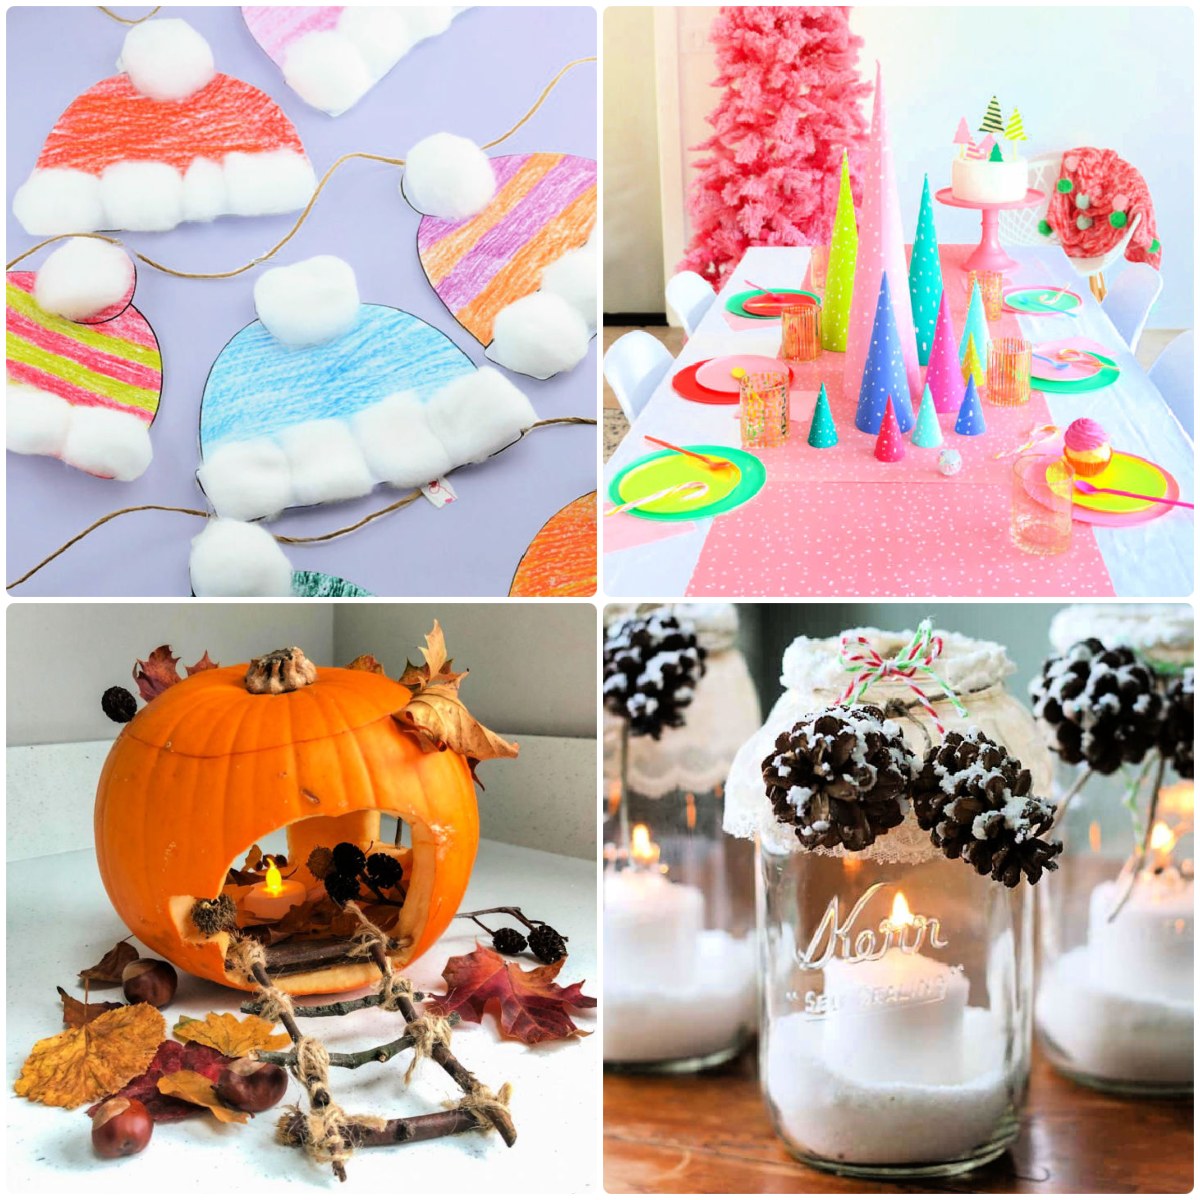 14 Cute Winter Crafts That Will Add Cheer to Your Home